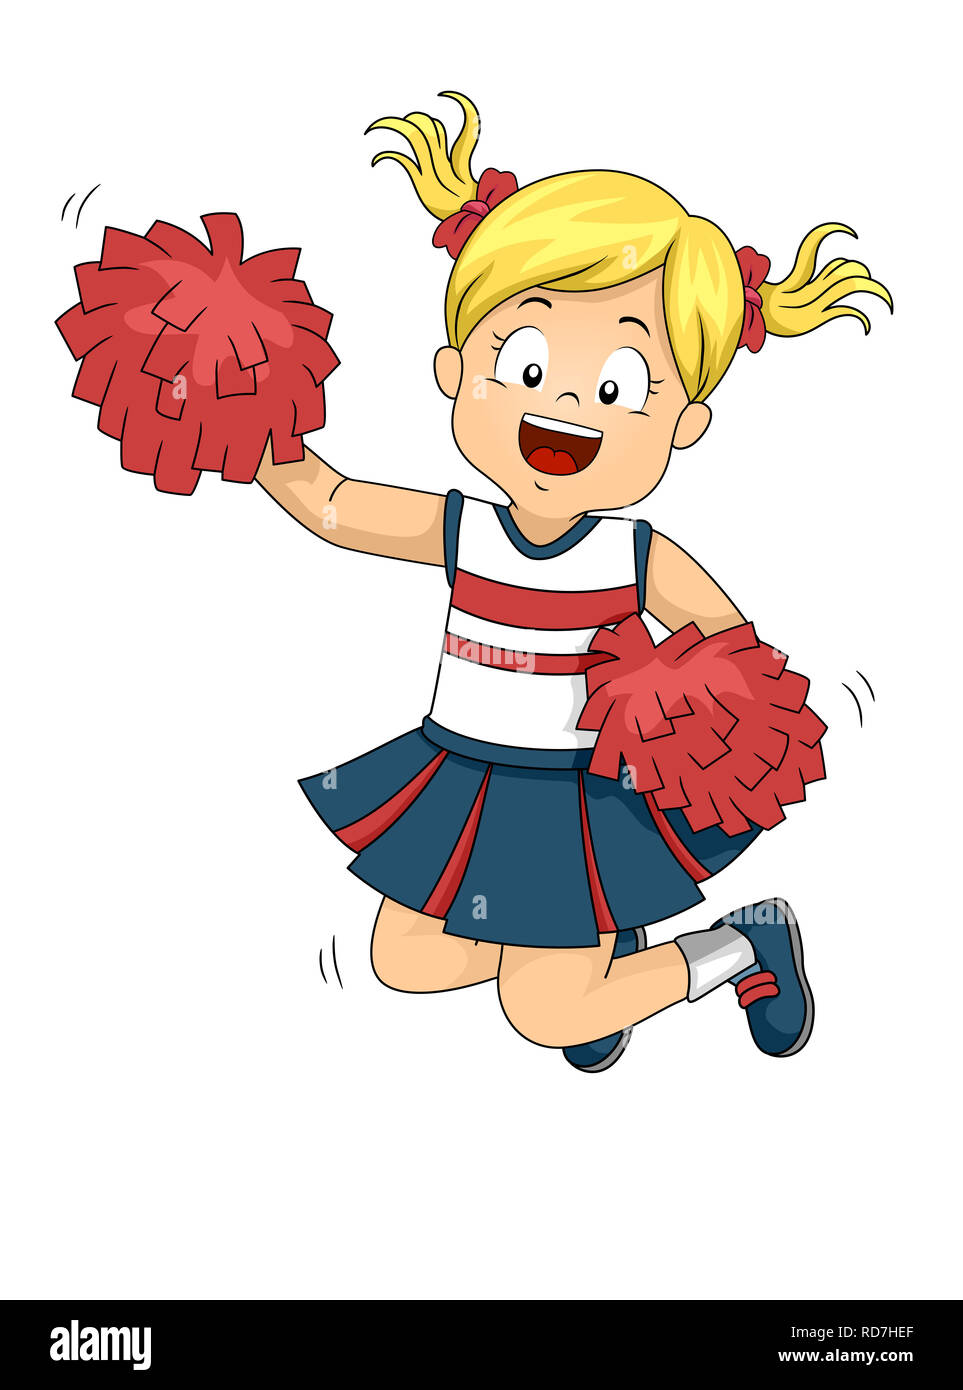 Little Girl Cheerleader With Pom Poms Vector Illustration Royalty Free SVG,  Cliparts, Vectors, and Stock Illustration. Image 10963550.